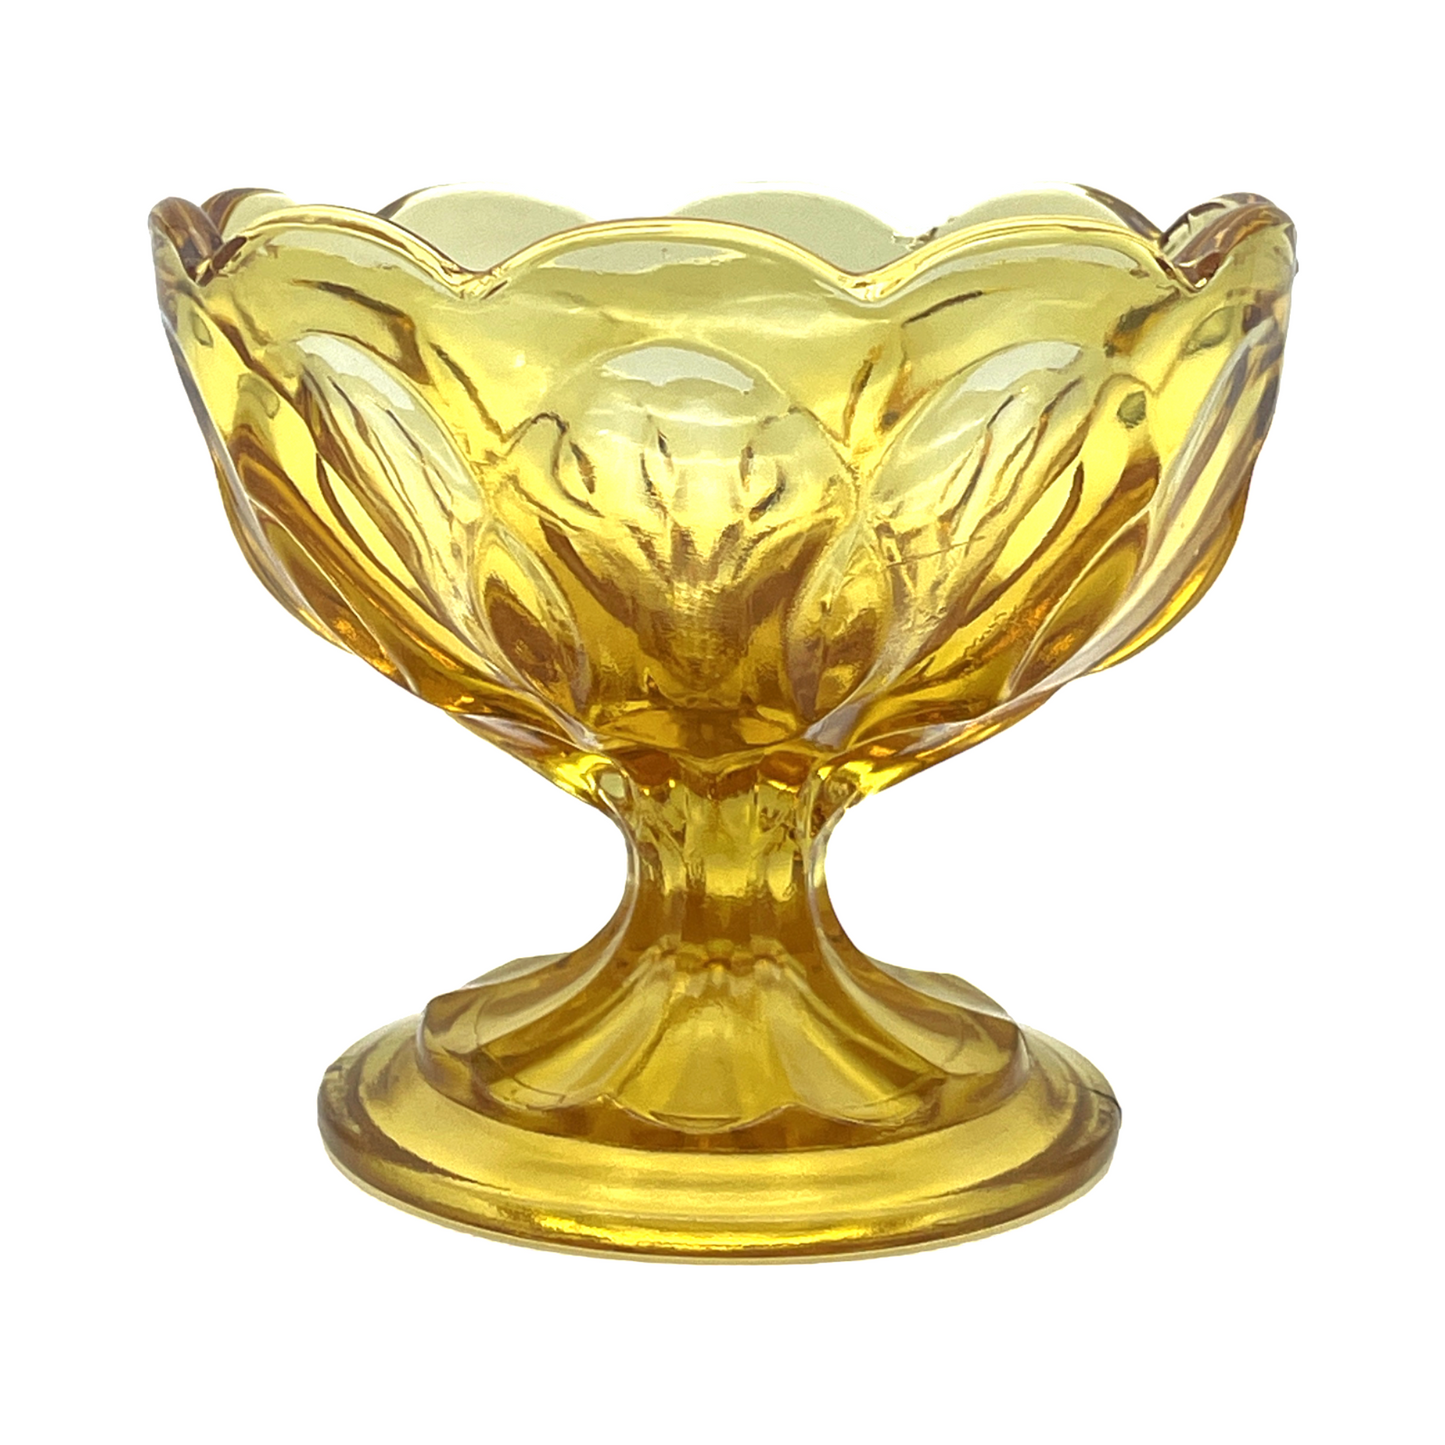 Anchor Hocking - Fairfield Amber Compote - 3.75"